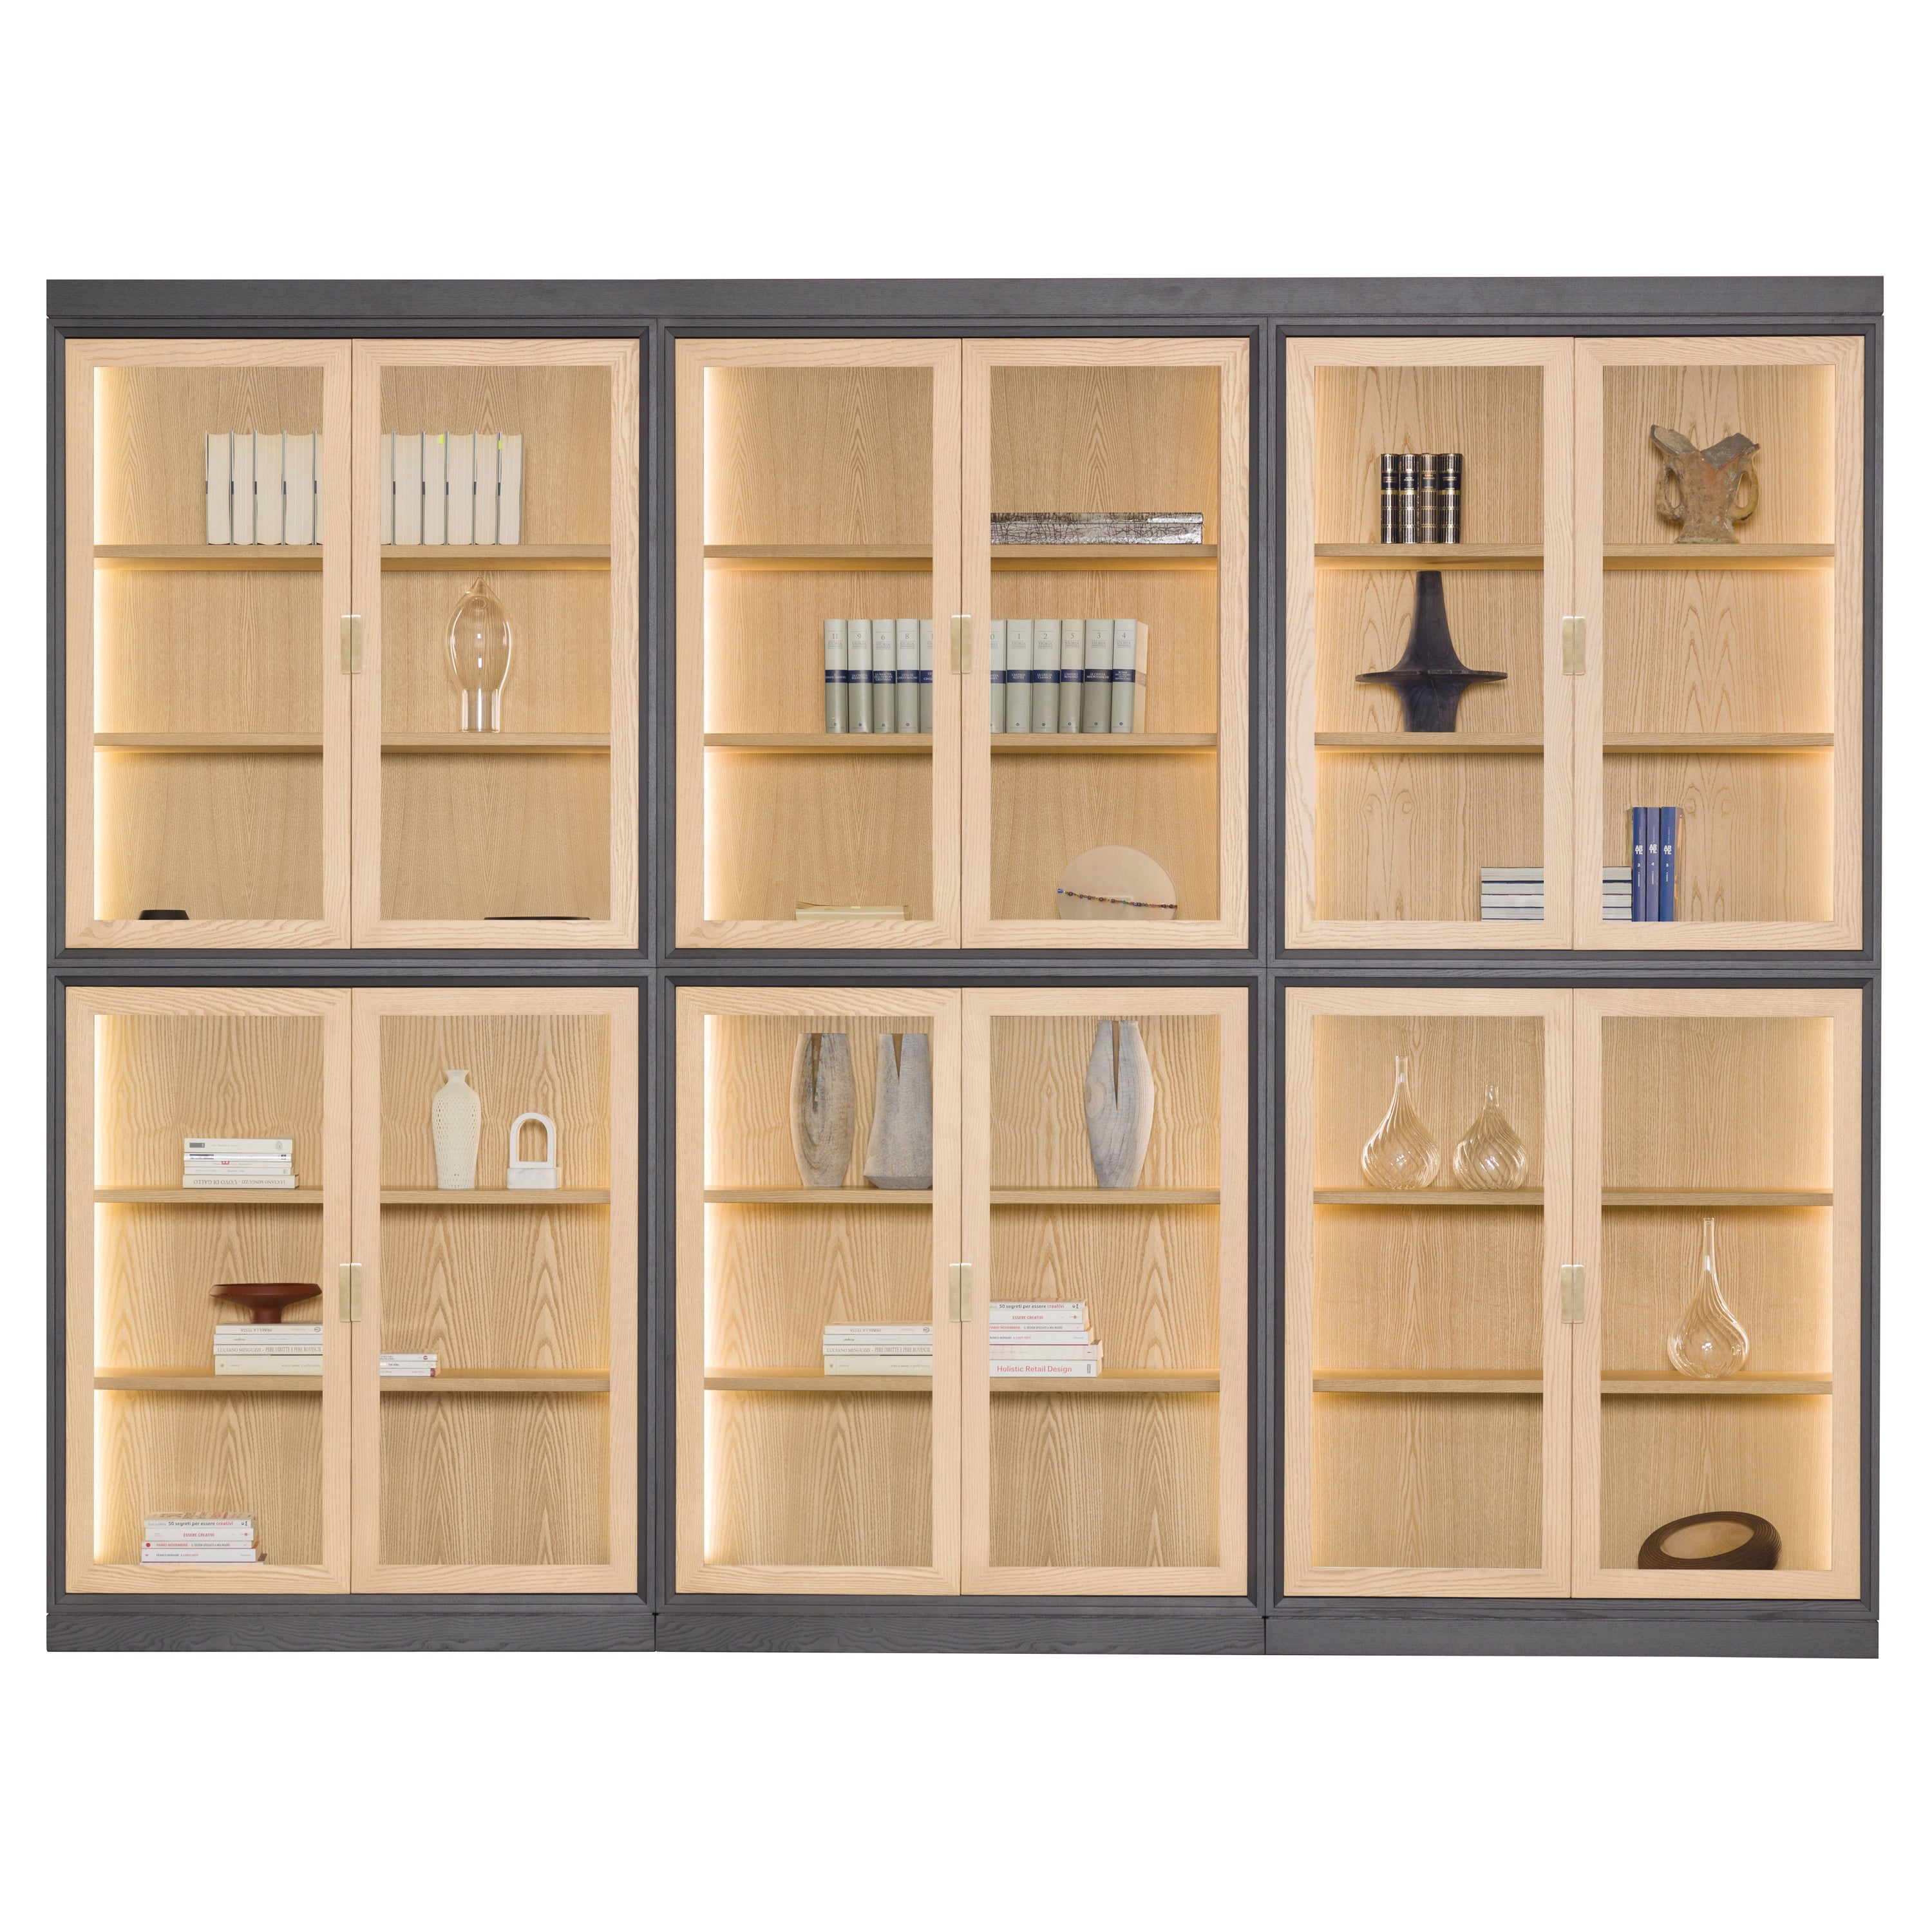 Morelato, Novecento Bookcase in Ash Wood with Led Lights